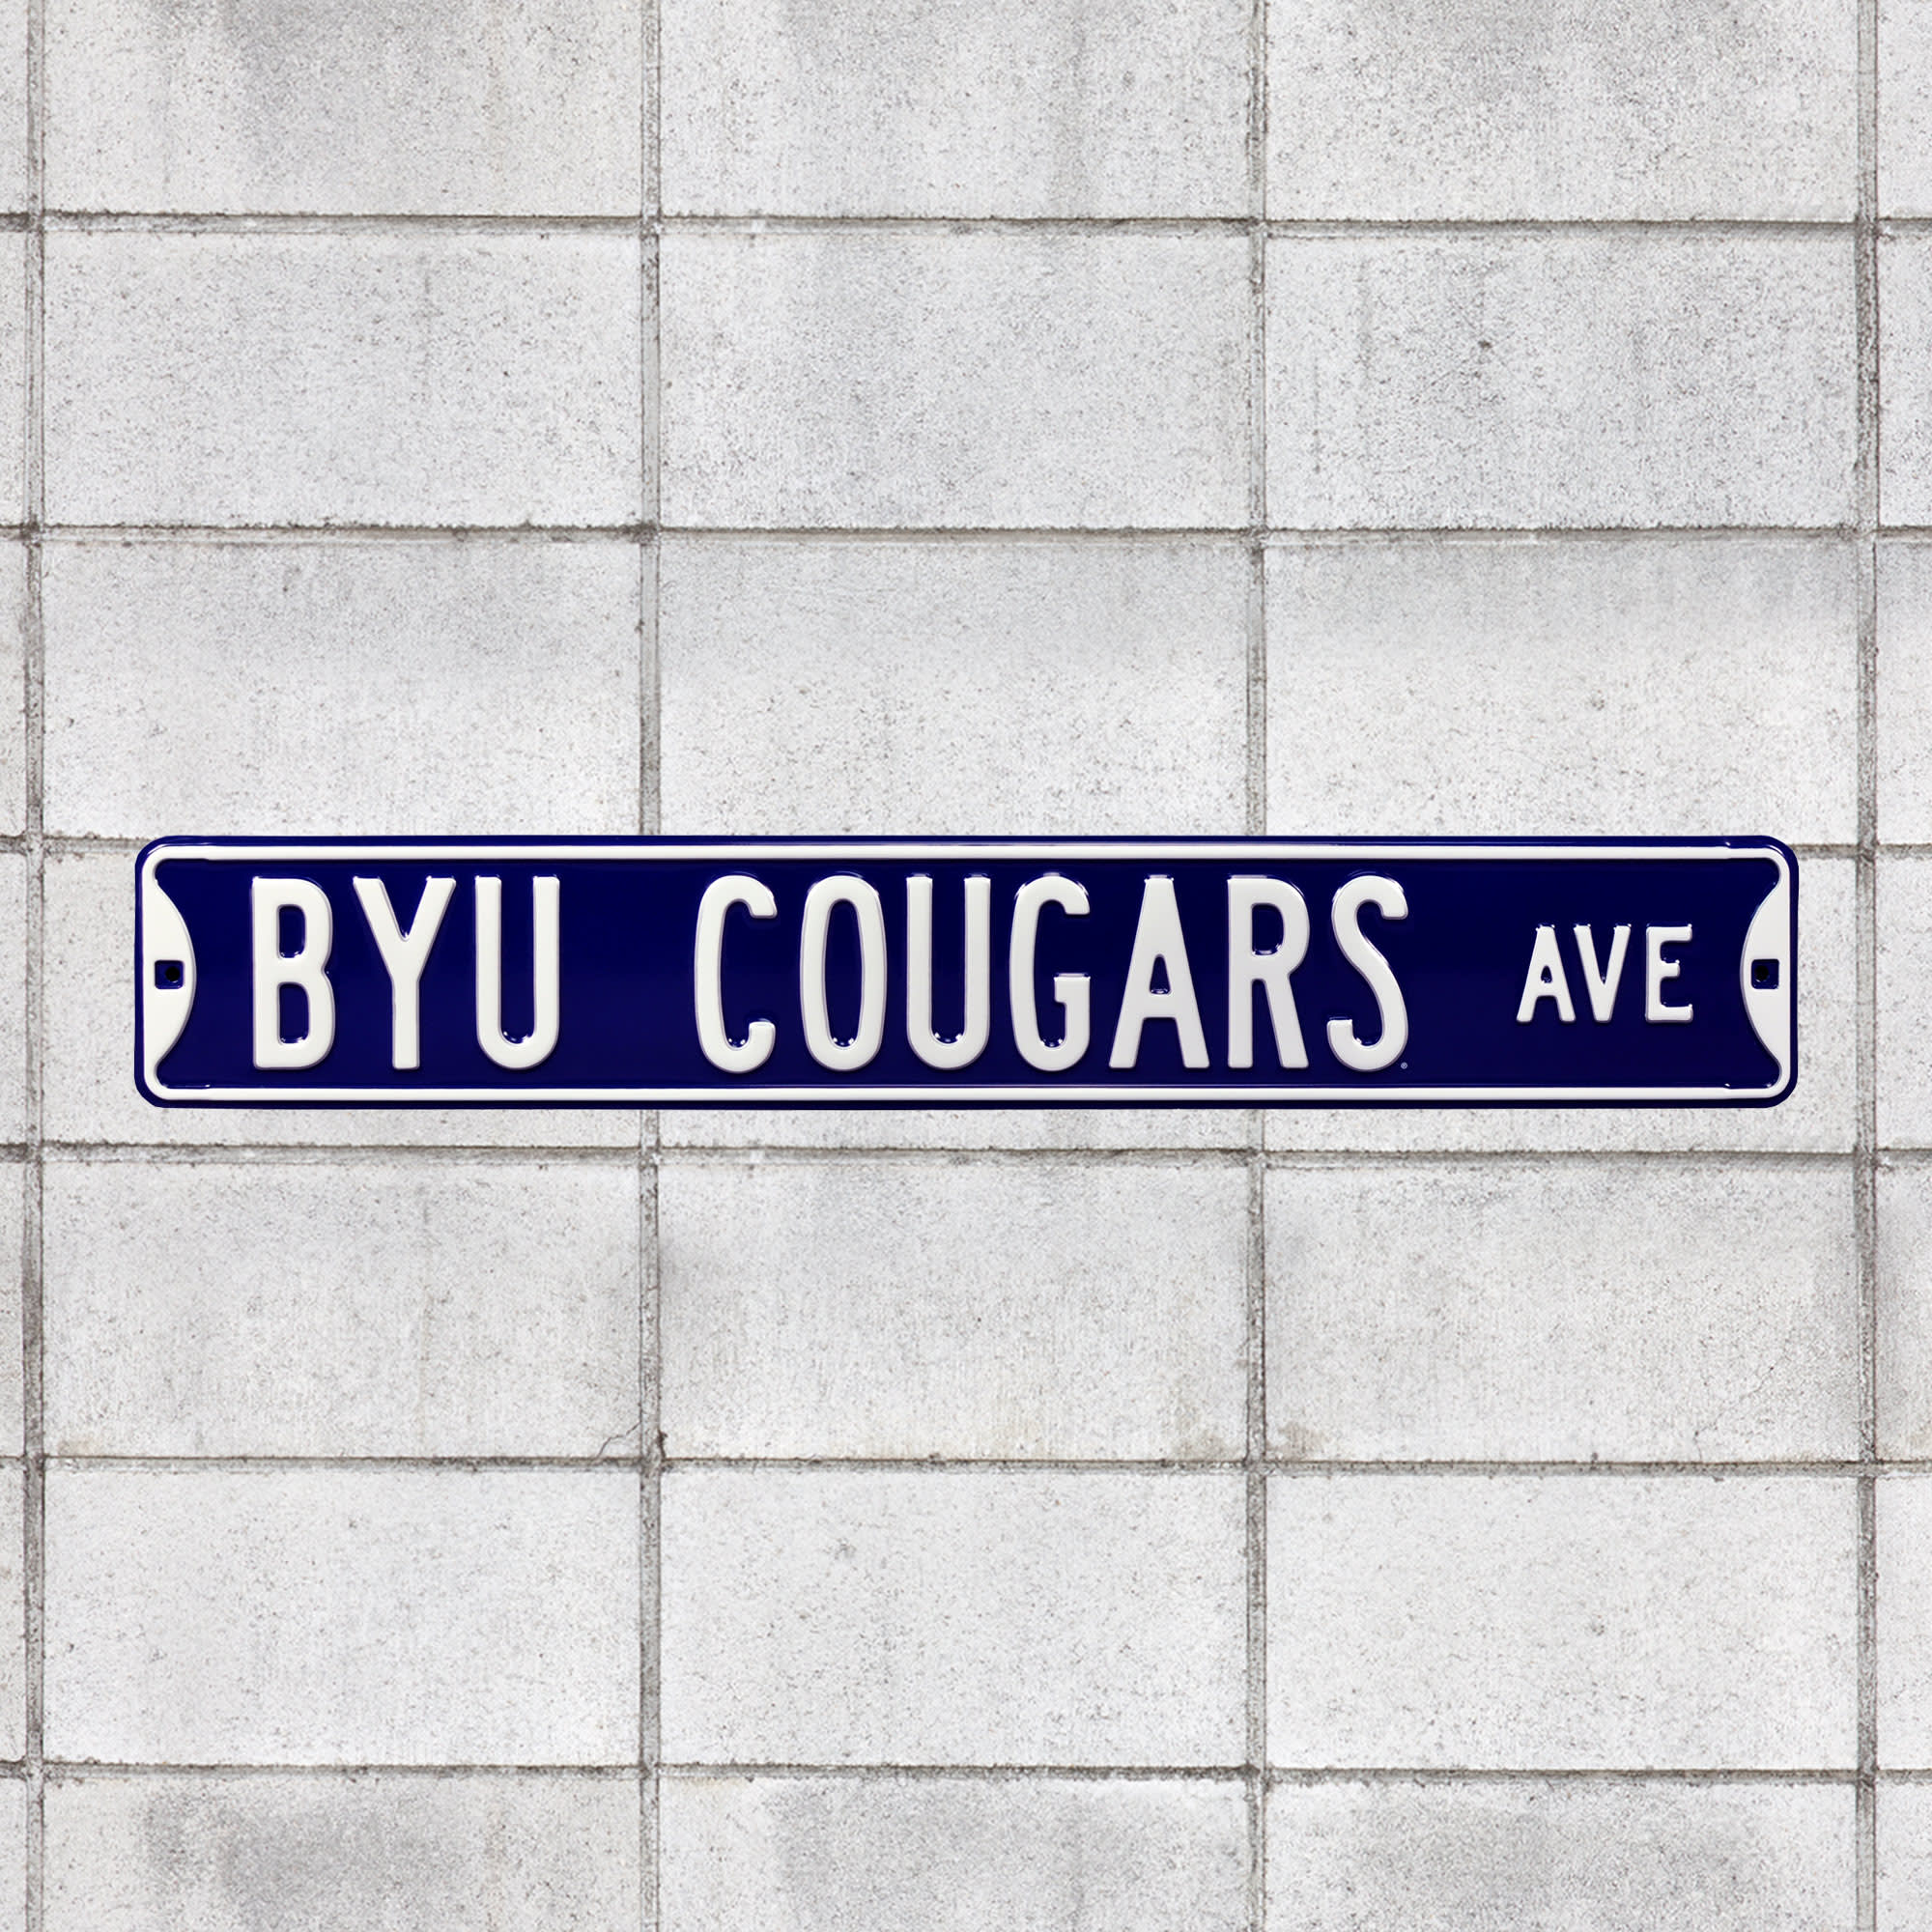 BYU Cougars: BYU Cougars Avenue - Officially Licensed Metal Street Sign 36.0"W x 6.0"H by Fathead | 100% Steel